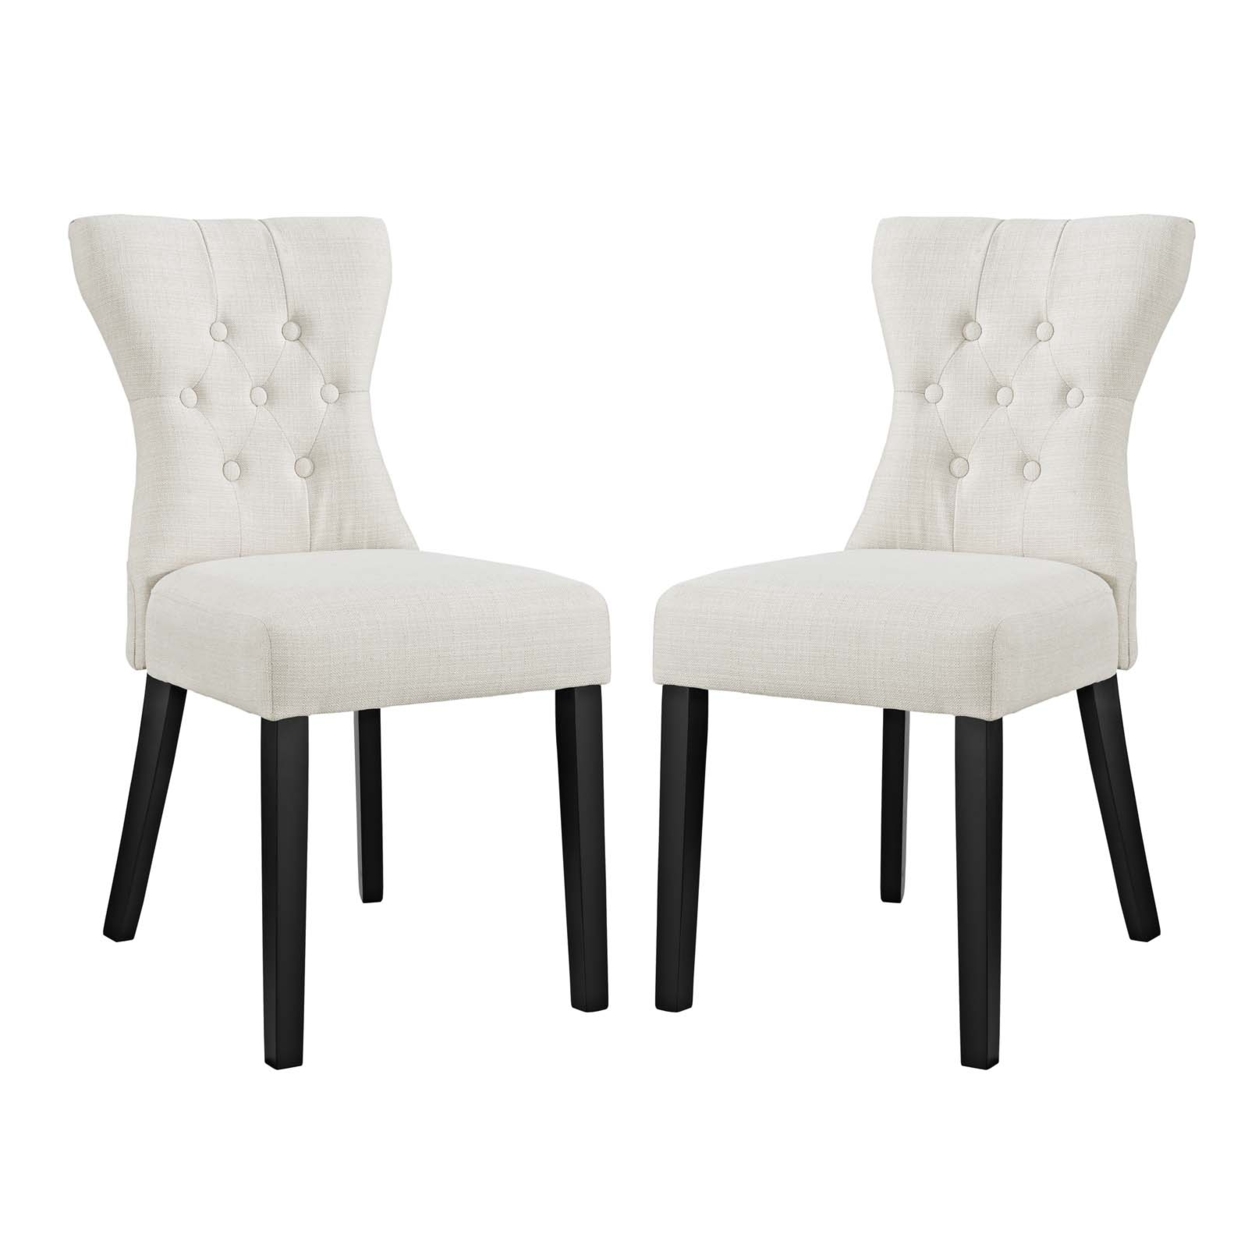 Silhouette Dining Side Chairs Upholstered Fabric Set Of 2,Beige